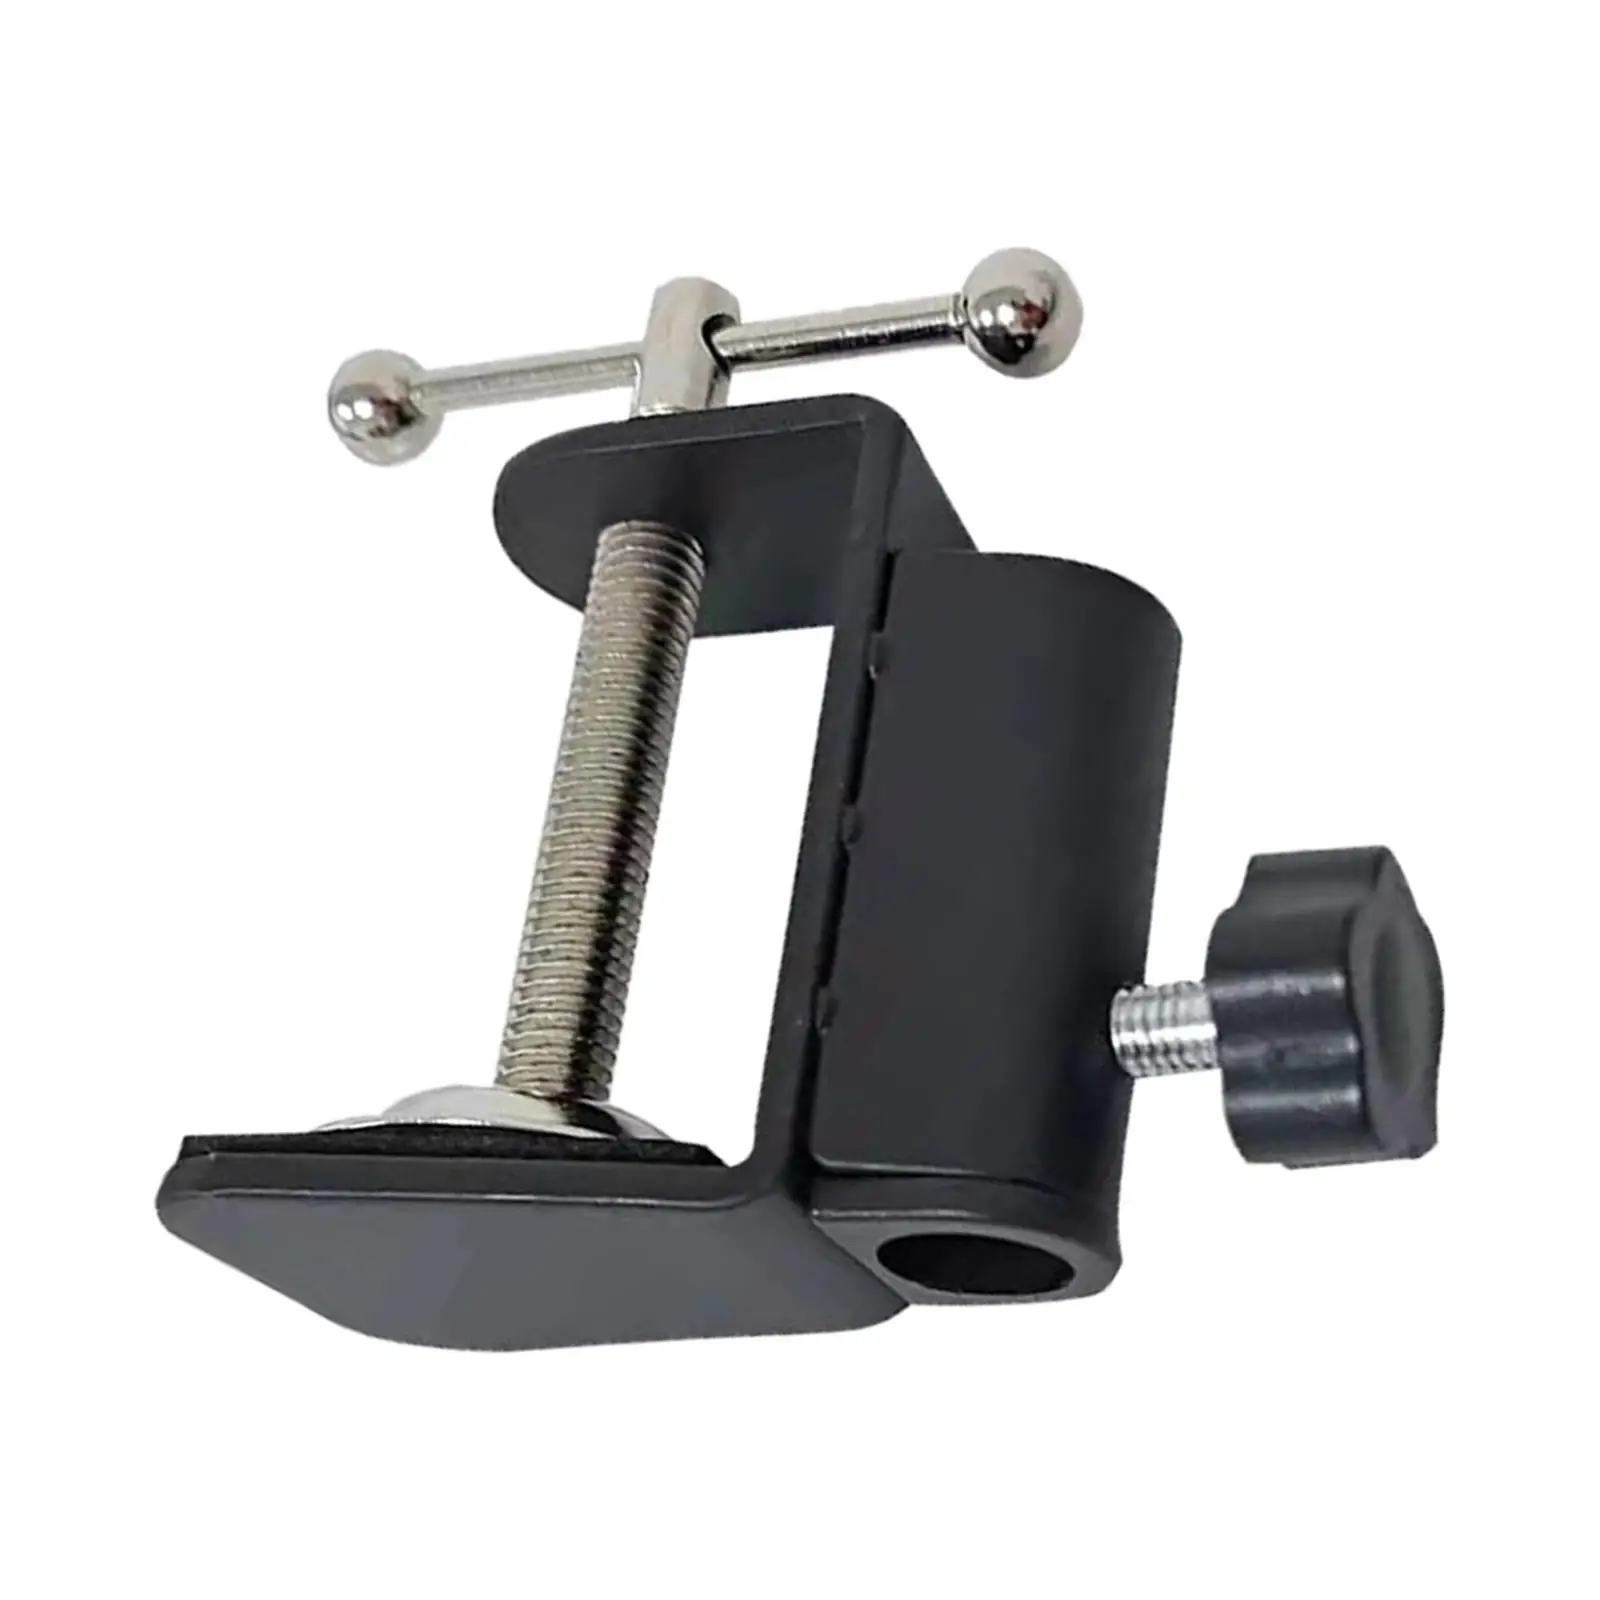 Desk Mount Clamp Rustproof Metal Construction Anti Slip Fits up to 1.77inch/4.5cm Thickness clip Clamp Holder for Mic Stand